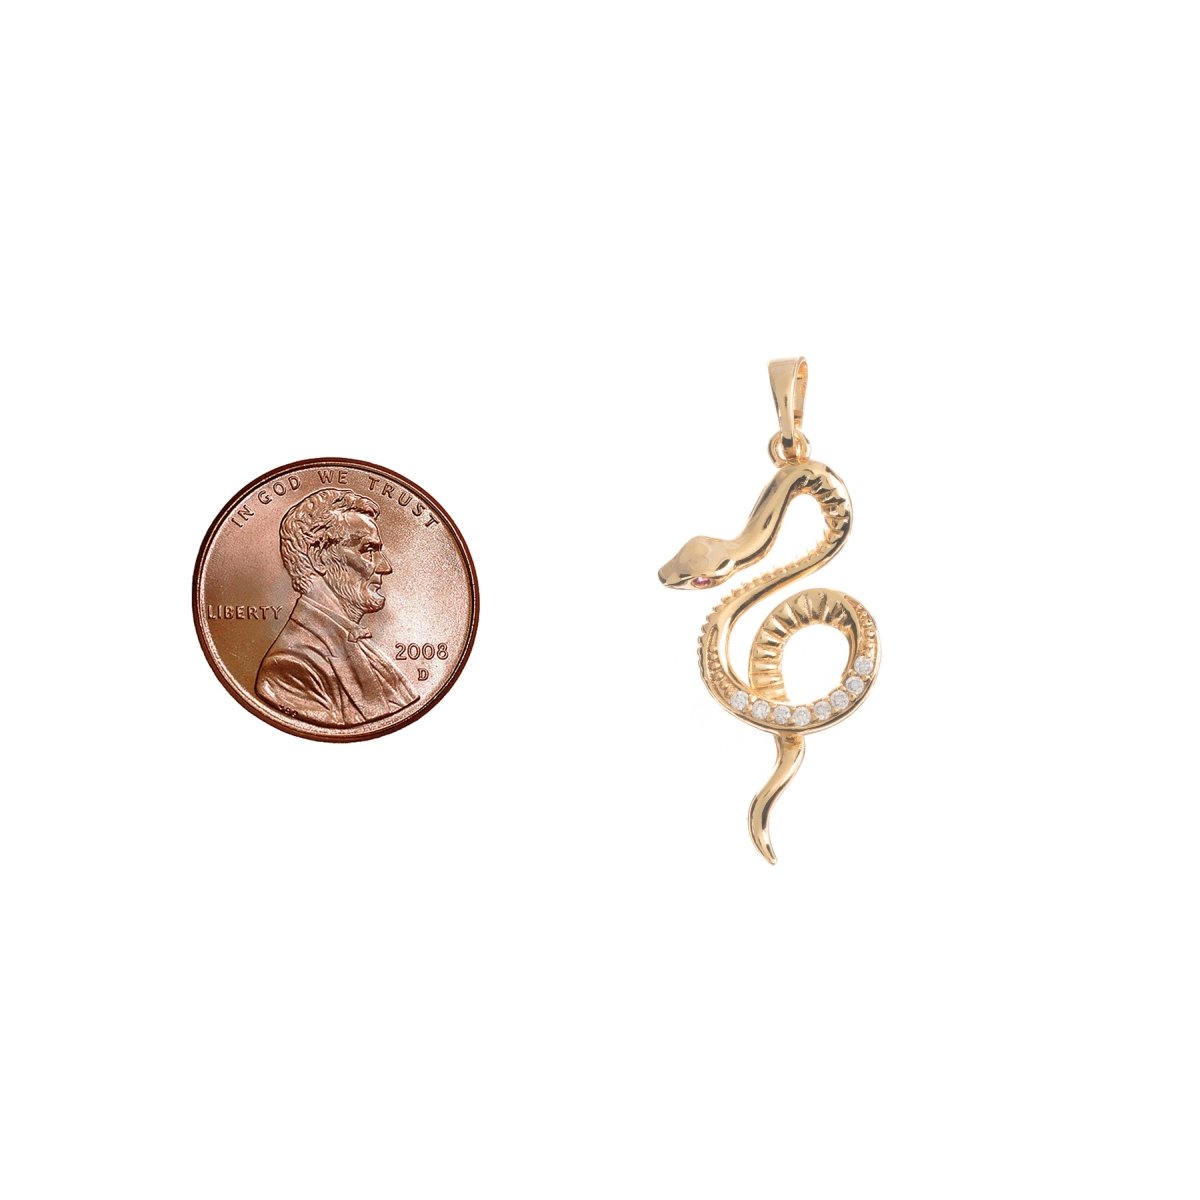 Snake charm, Gold Filled Snake Charm, Reptile Animal, Serpent Charm Necklace Pendant Bead Finding for Jewelry Making Supply H-703 - DLUXCA